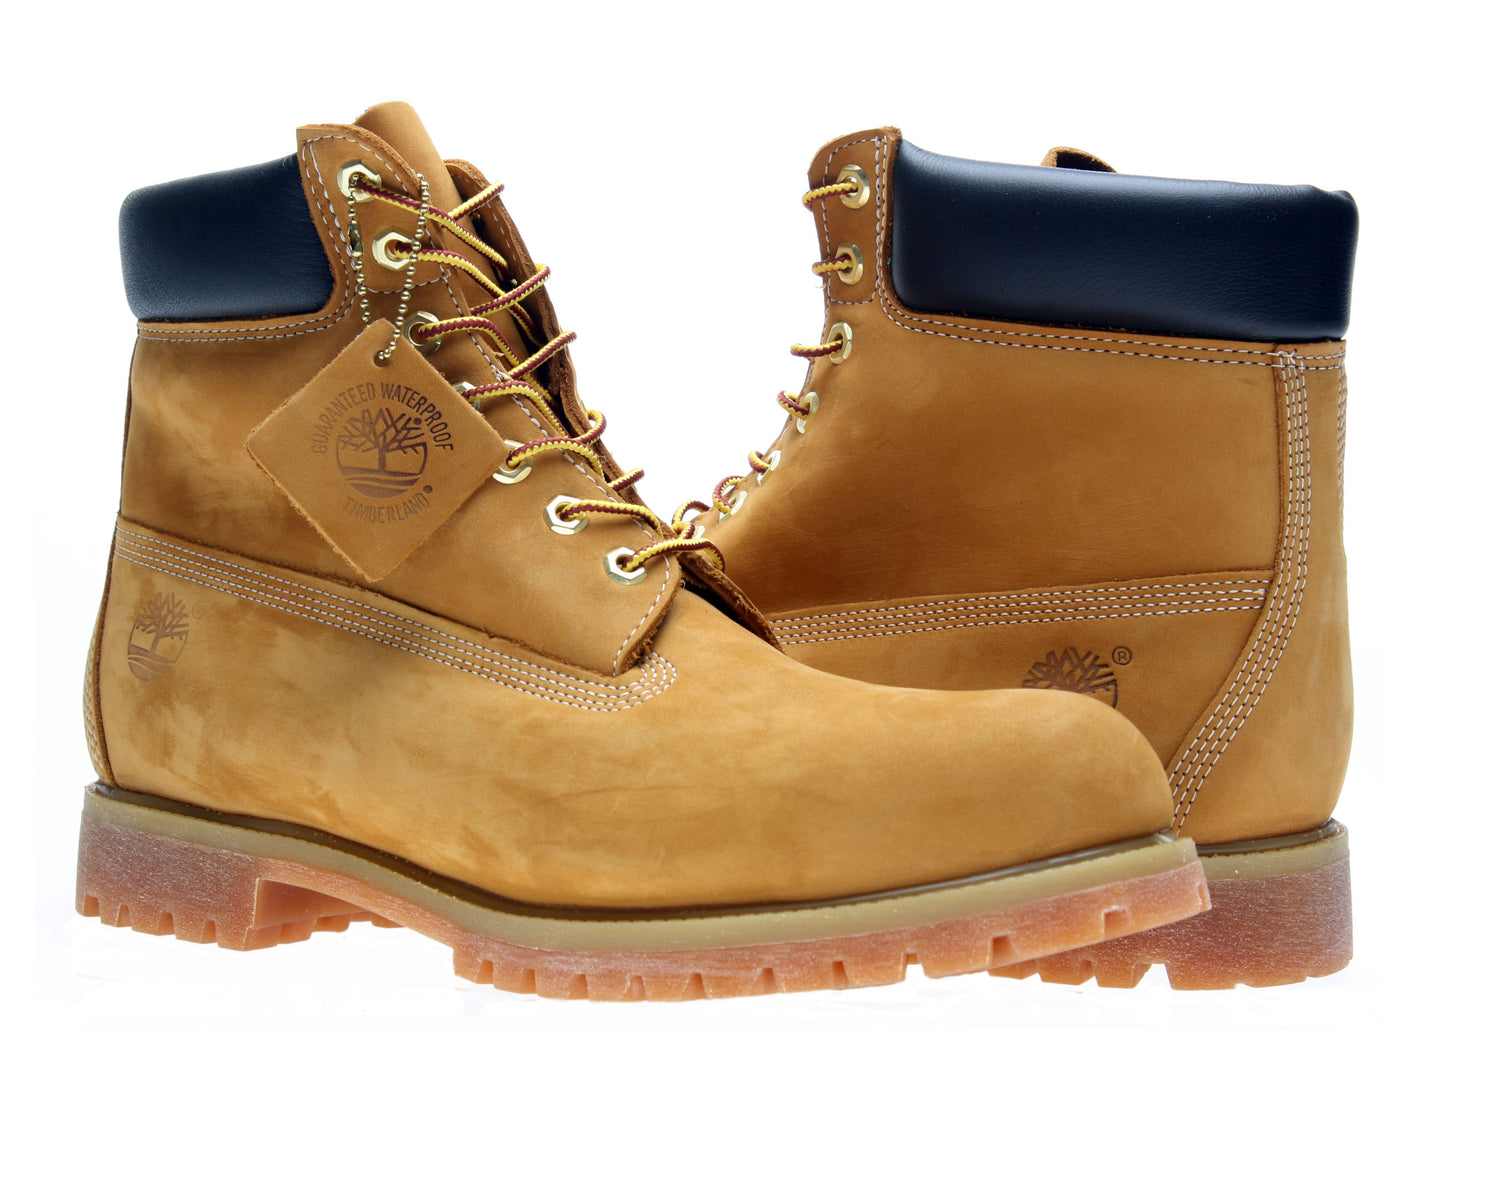 Timberland - Best Sellers